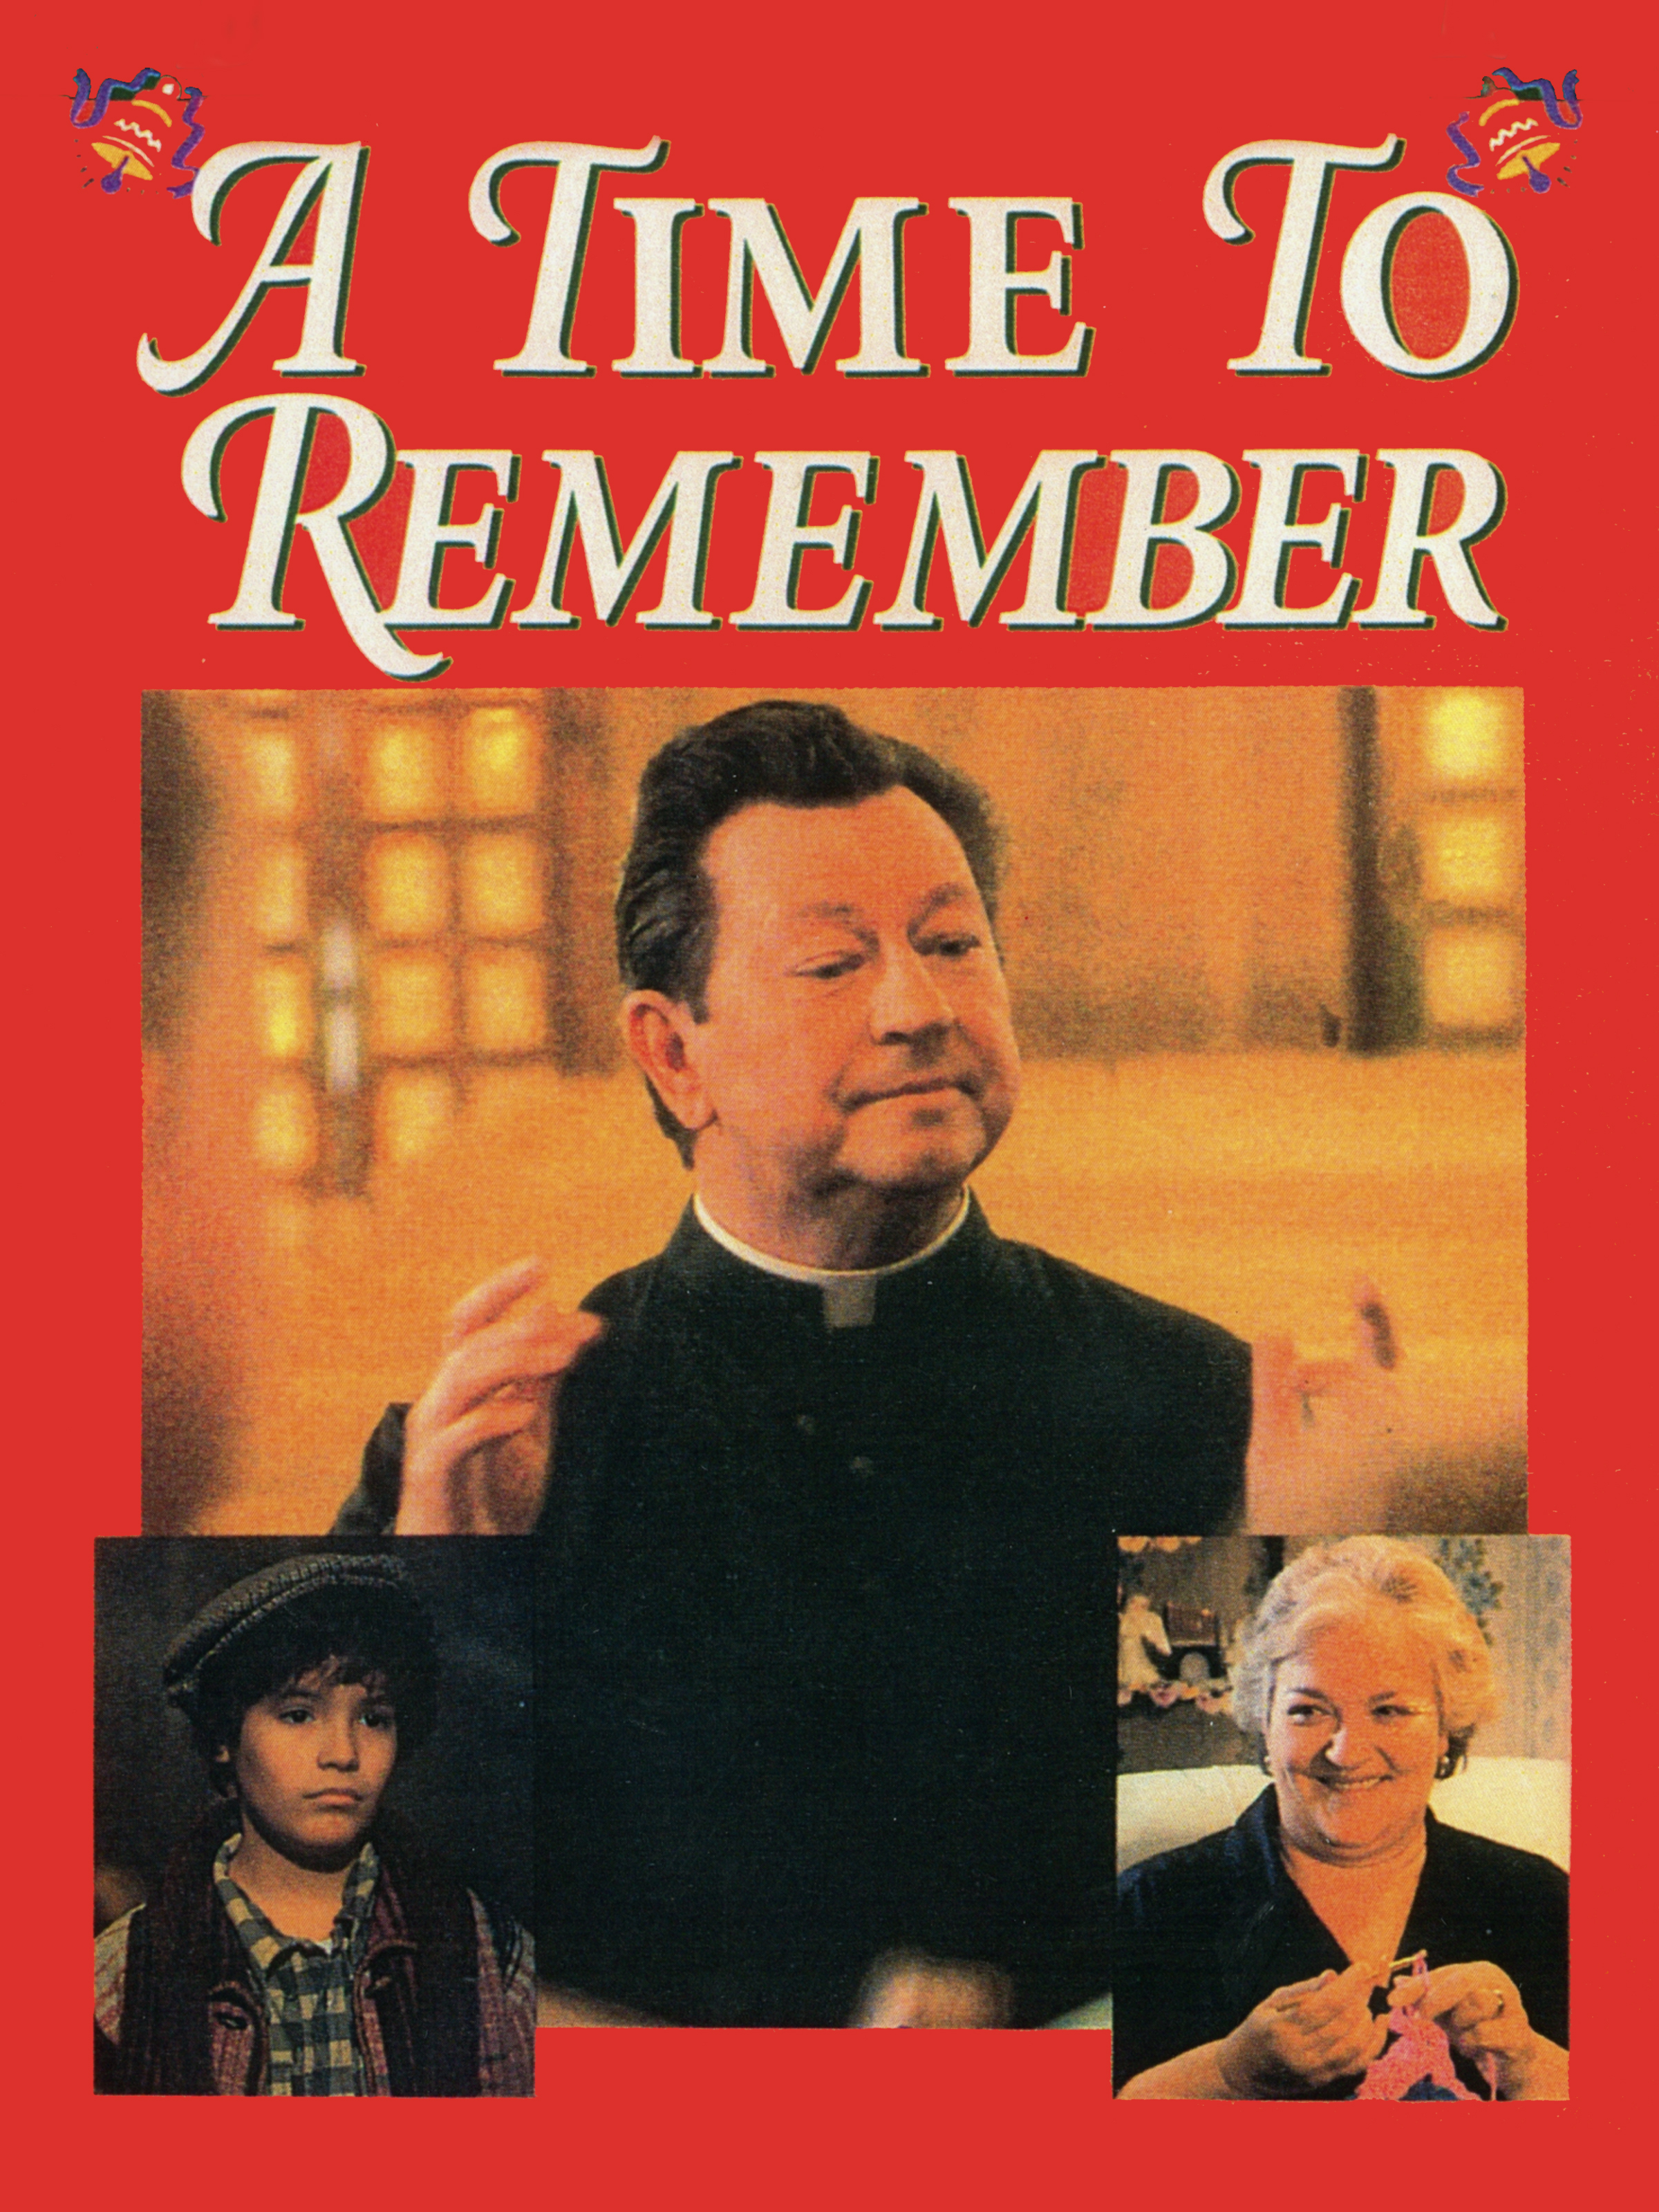 A Time to Remember (1988) Screenshot 2 